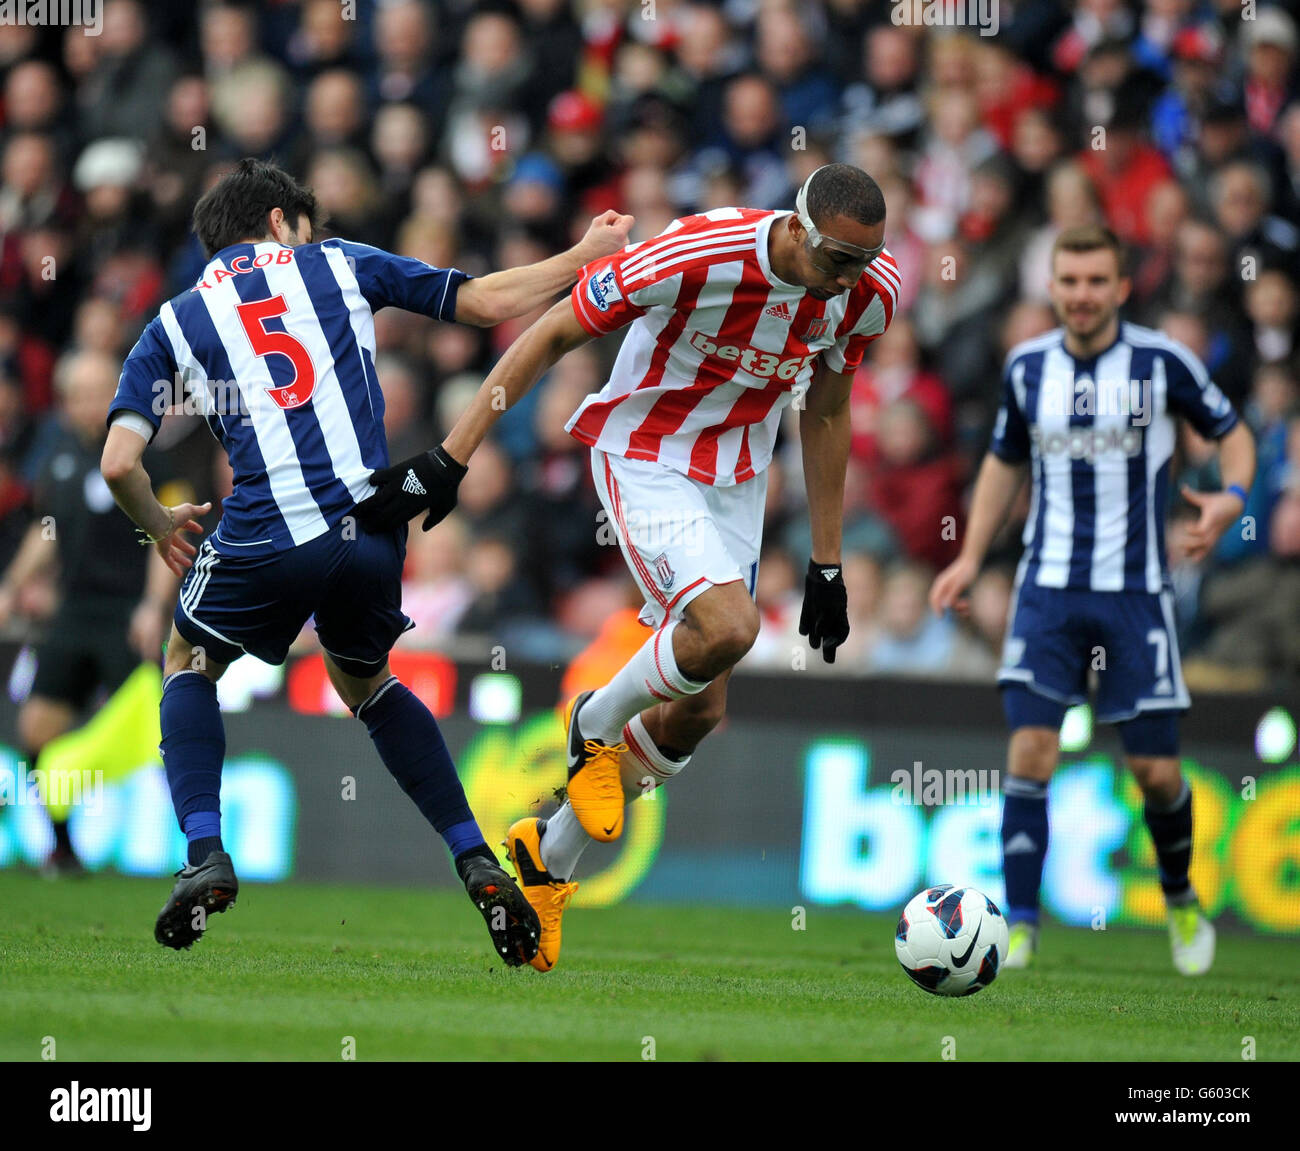 Stoke City's Steven Nzonzi goes past West Bromwich Albion's Claudio Yacob during the Barclays Premier League match at the Britannia Stadium, Stoke. Stock Photo